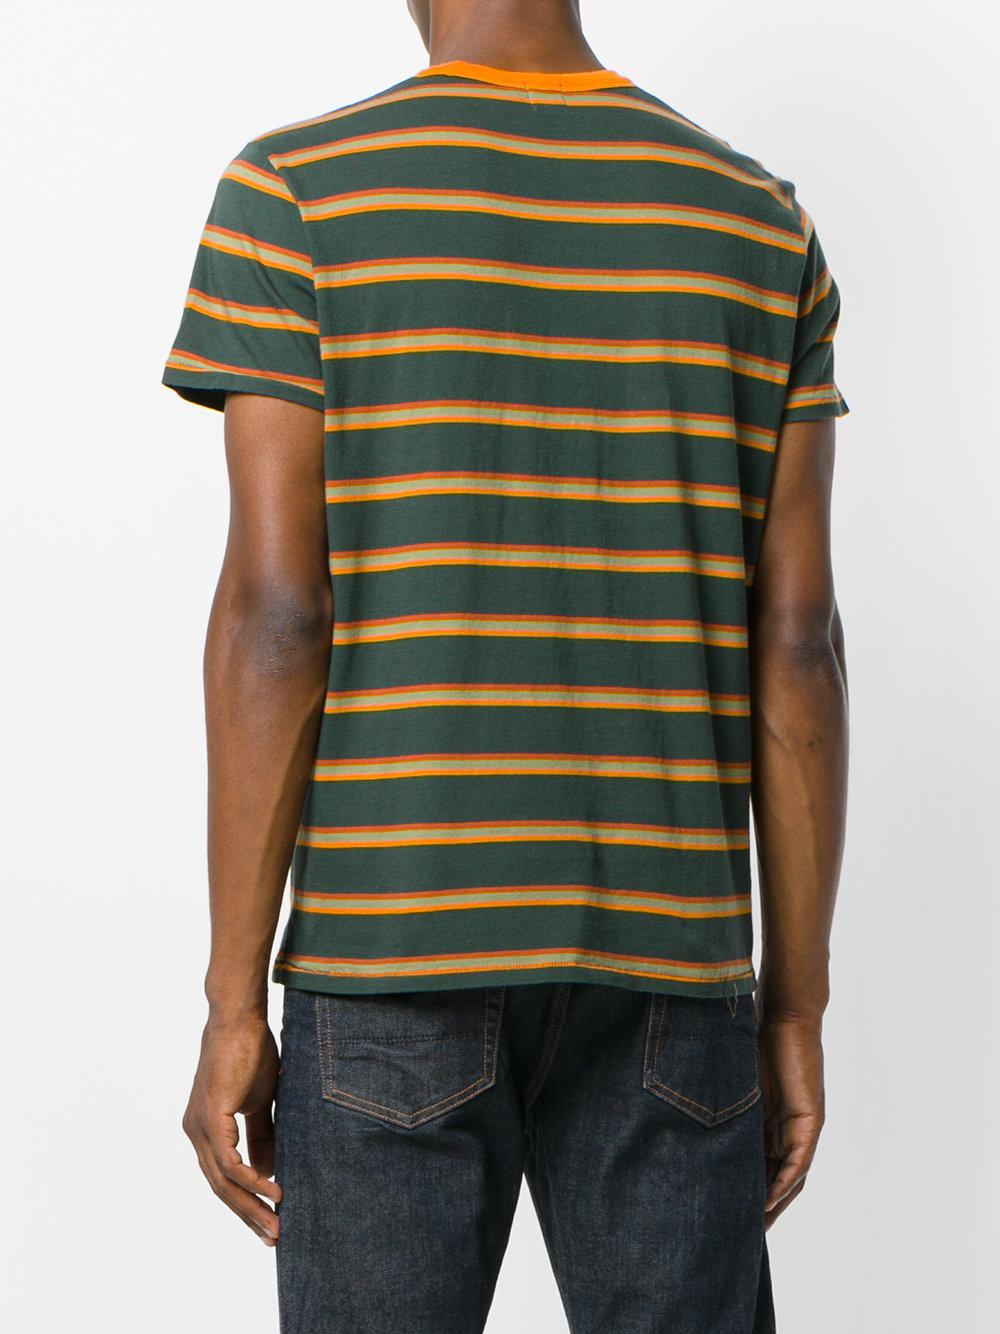 Levi's Cotton 1960s Striped T-shirt in Green for Men - Lyst